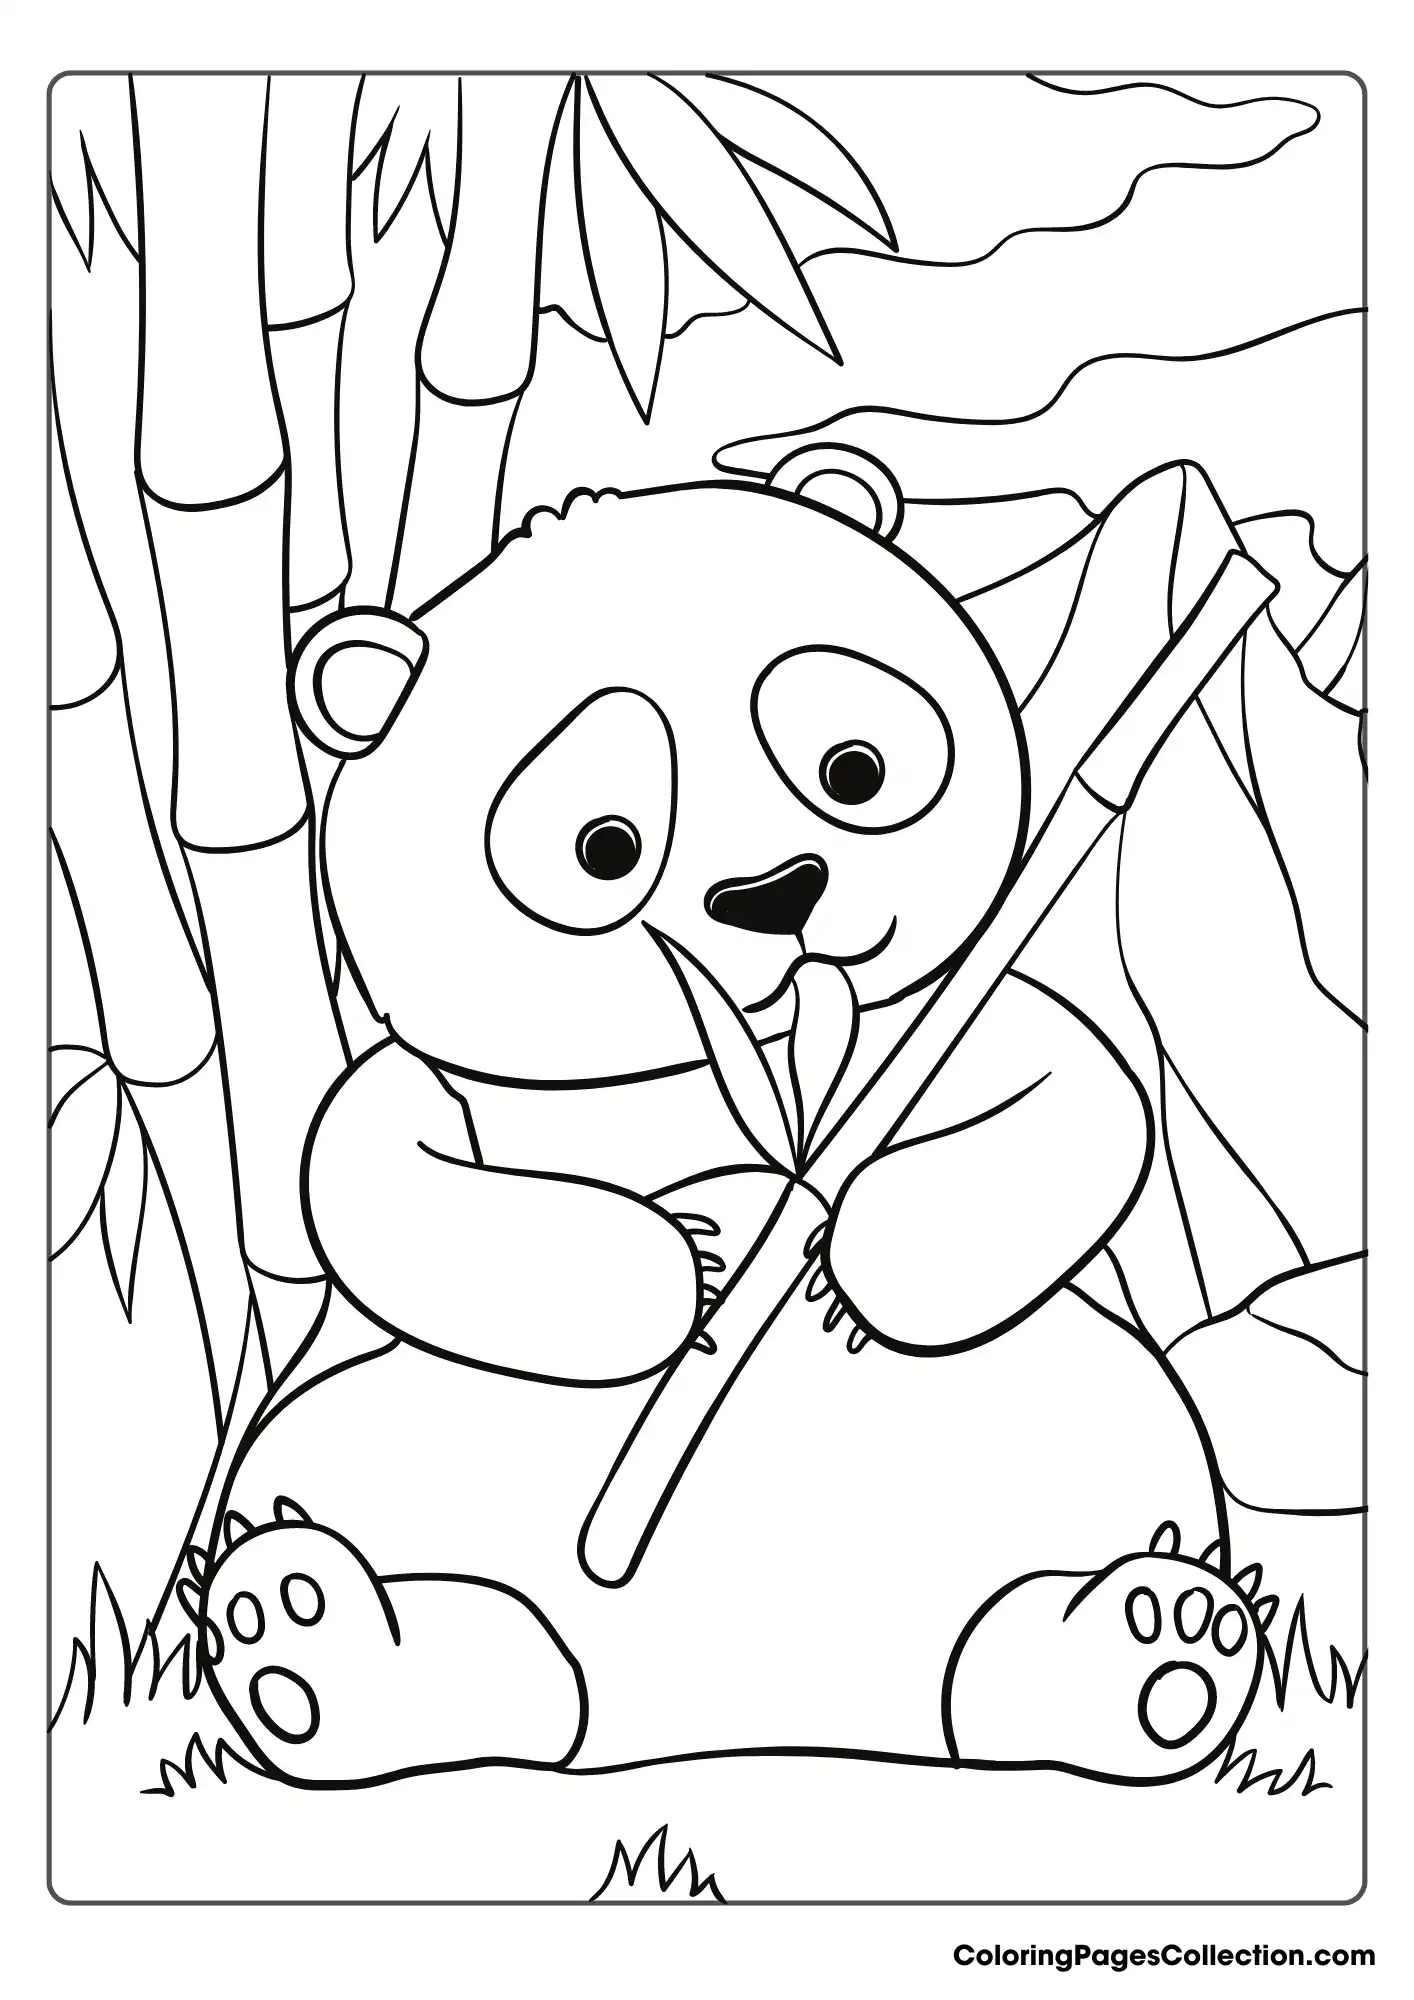 Coloring pages for teens, Cute Panda